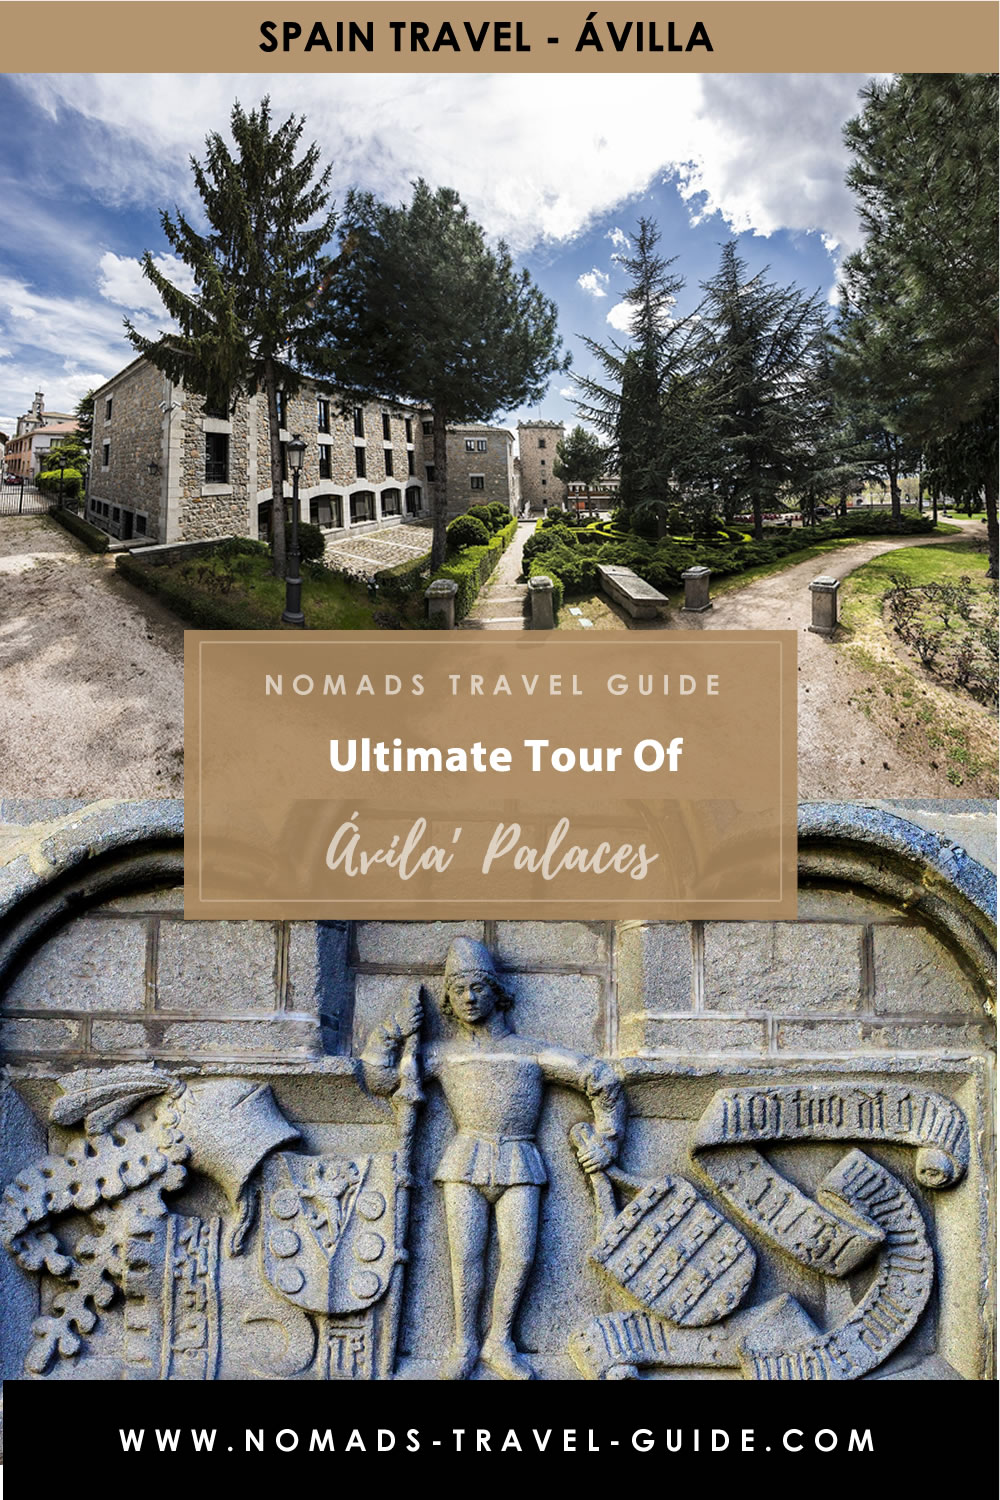 Guide To Avilas Palaces